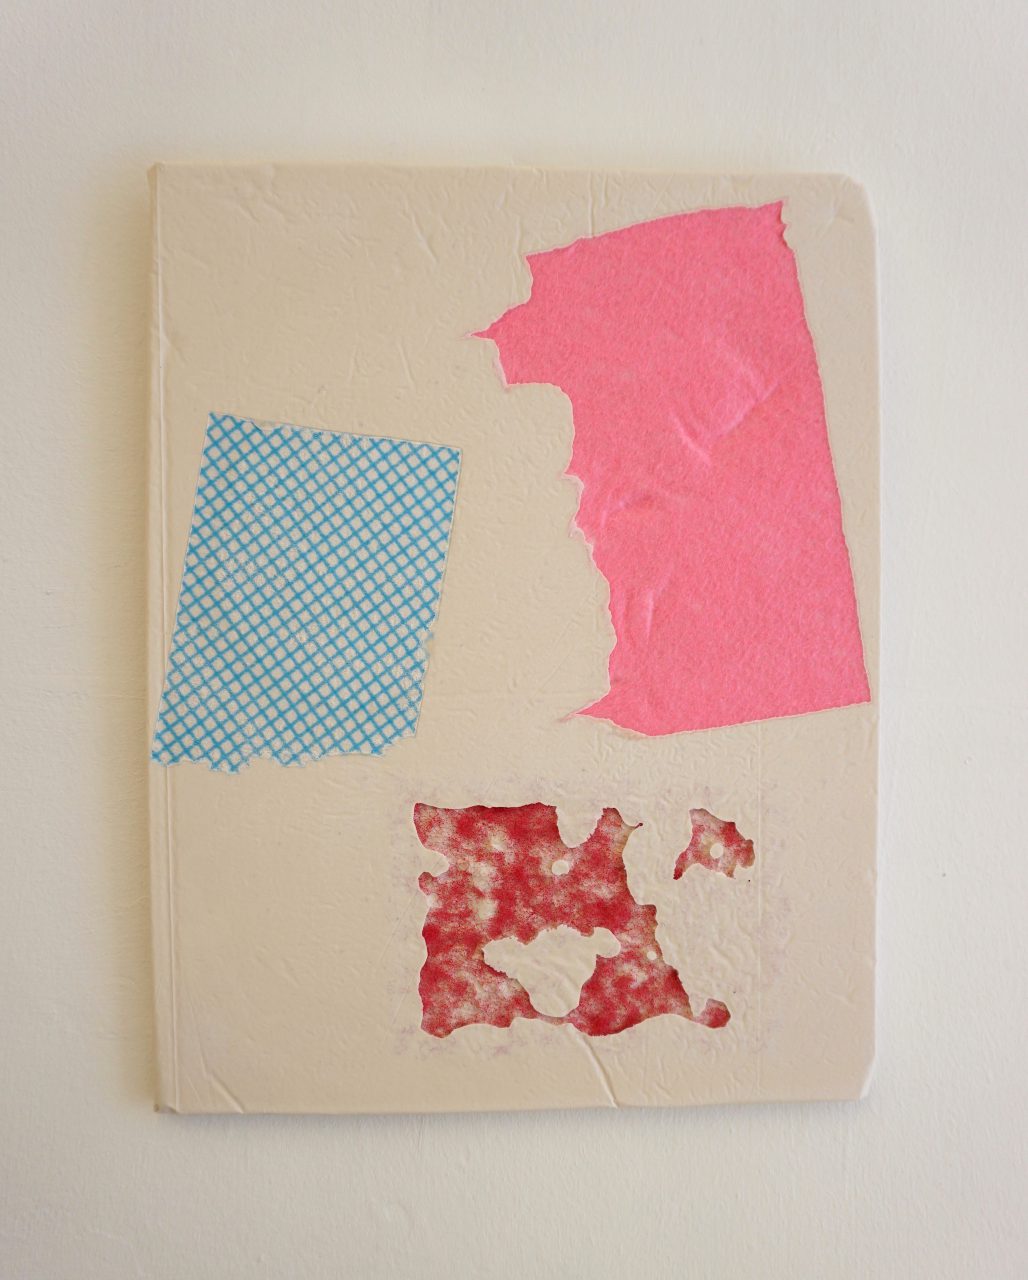 Domestic Bliss Fragment (red, blue, pink) | Composite, Mixed Media | 35 x 28 cm